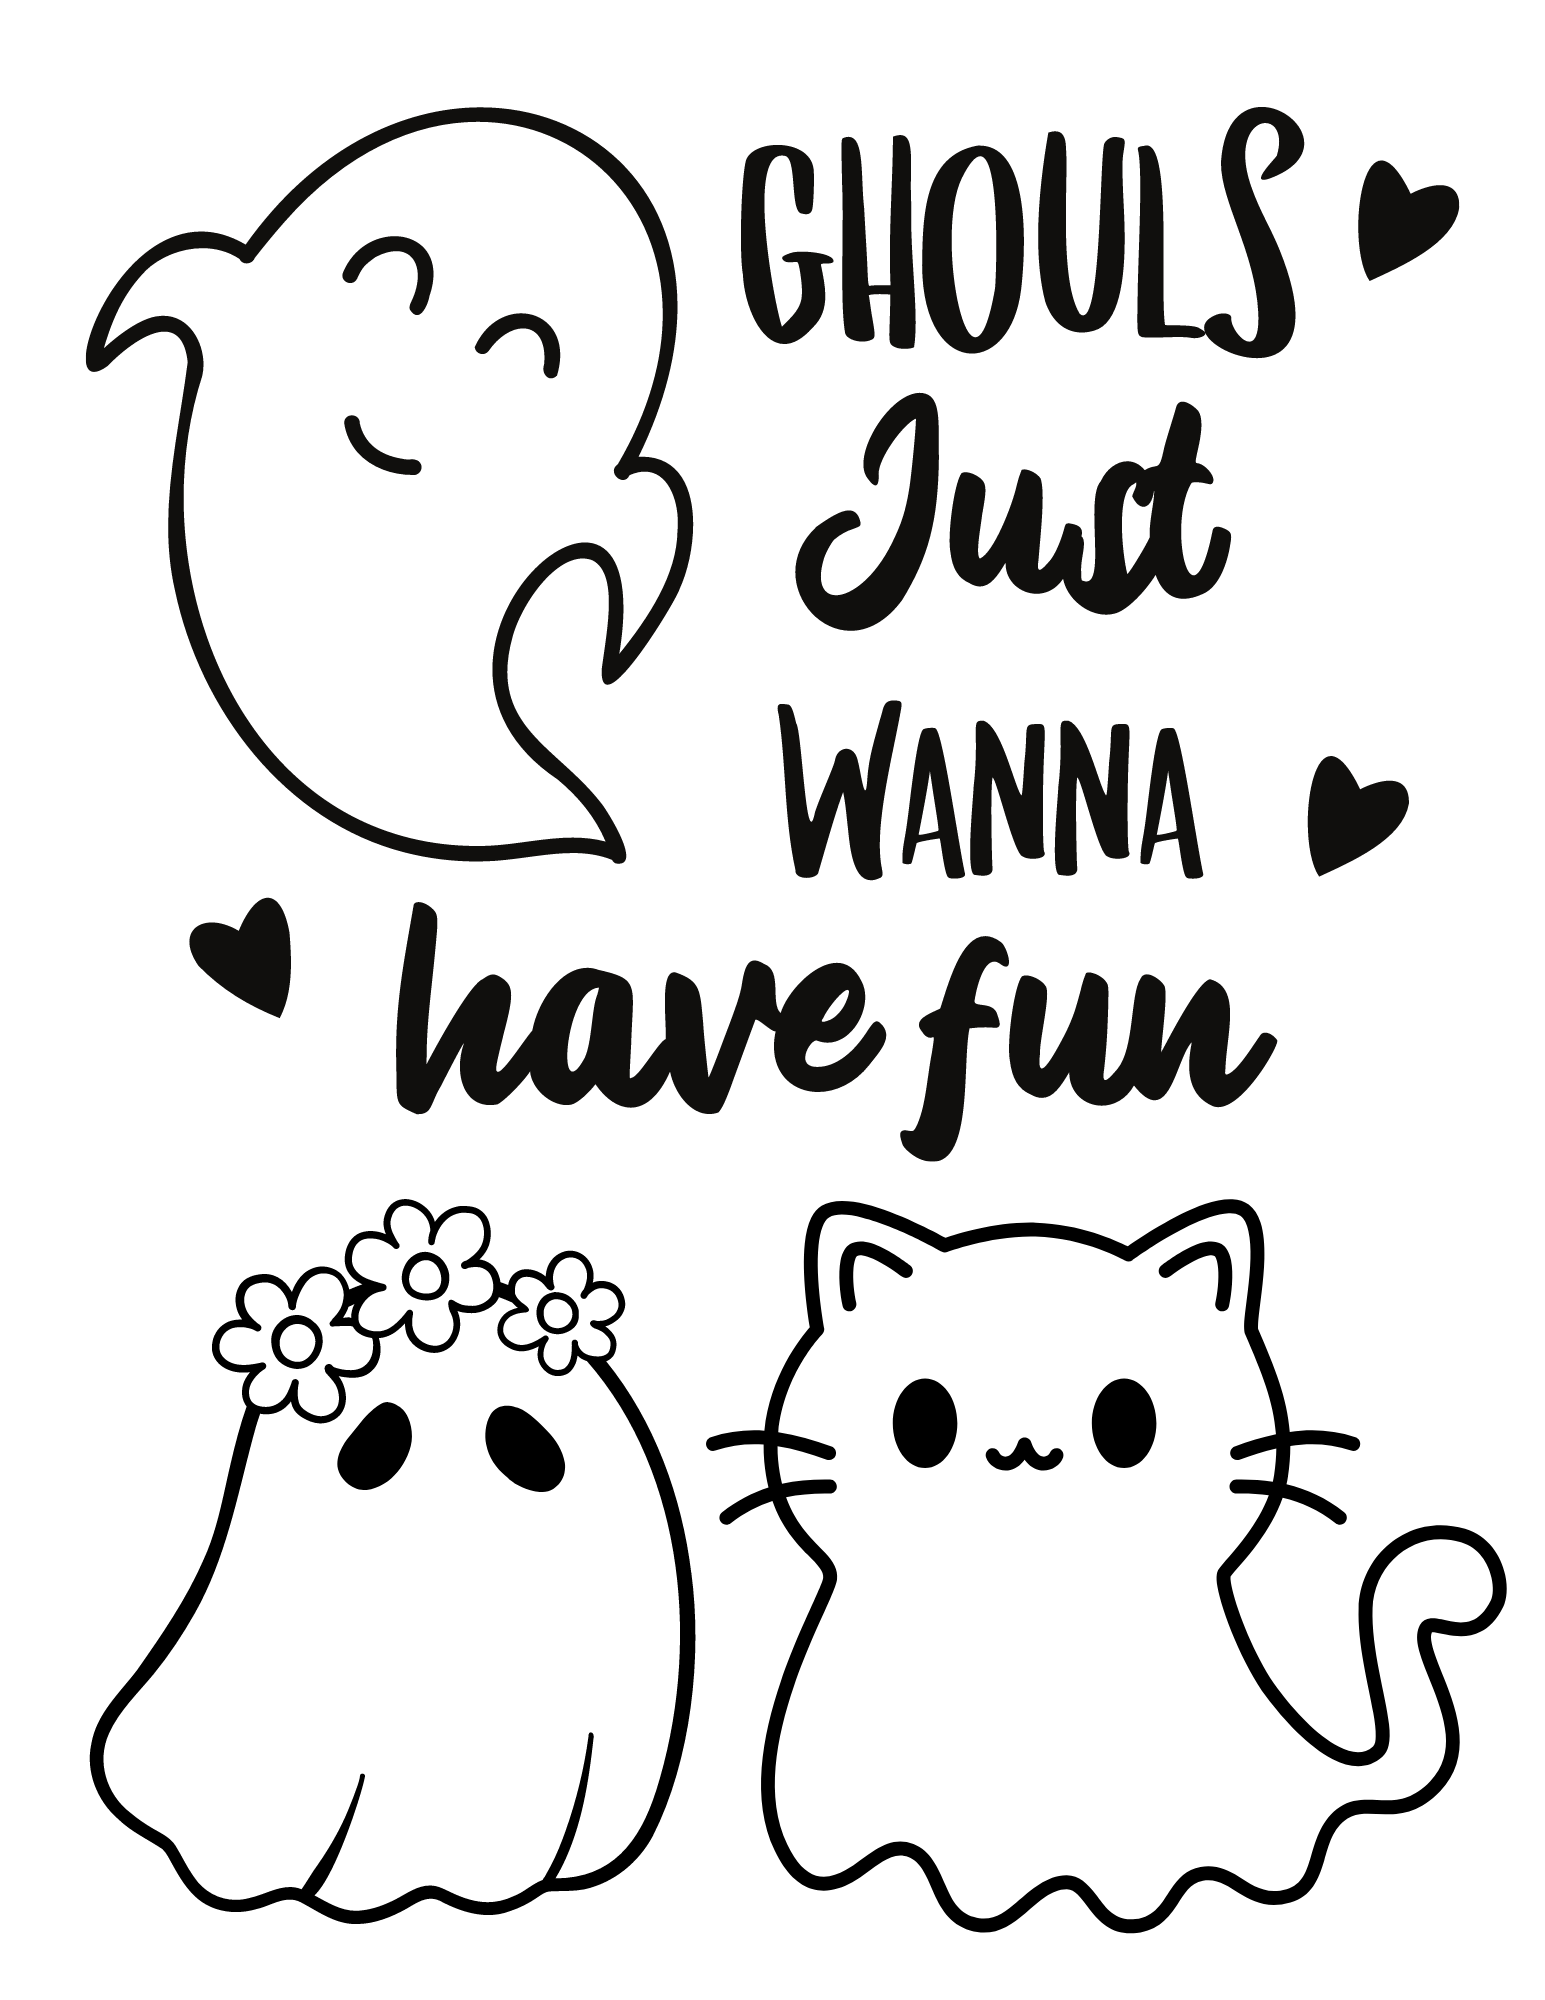 Spooktacular ghost coloring pages for kids and adults